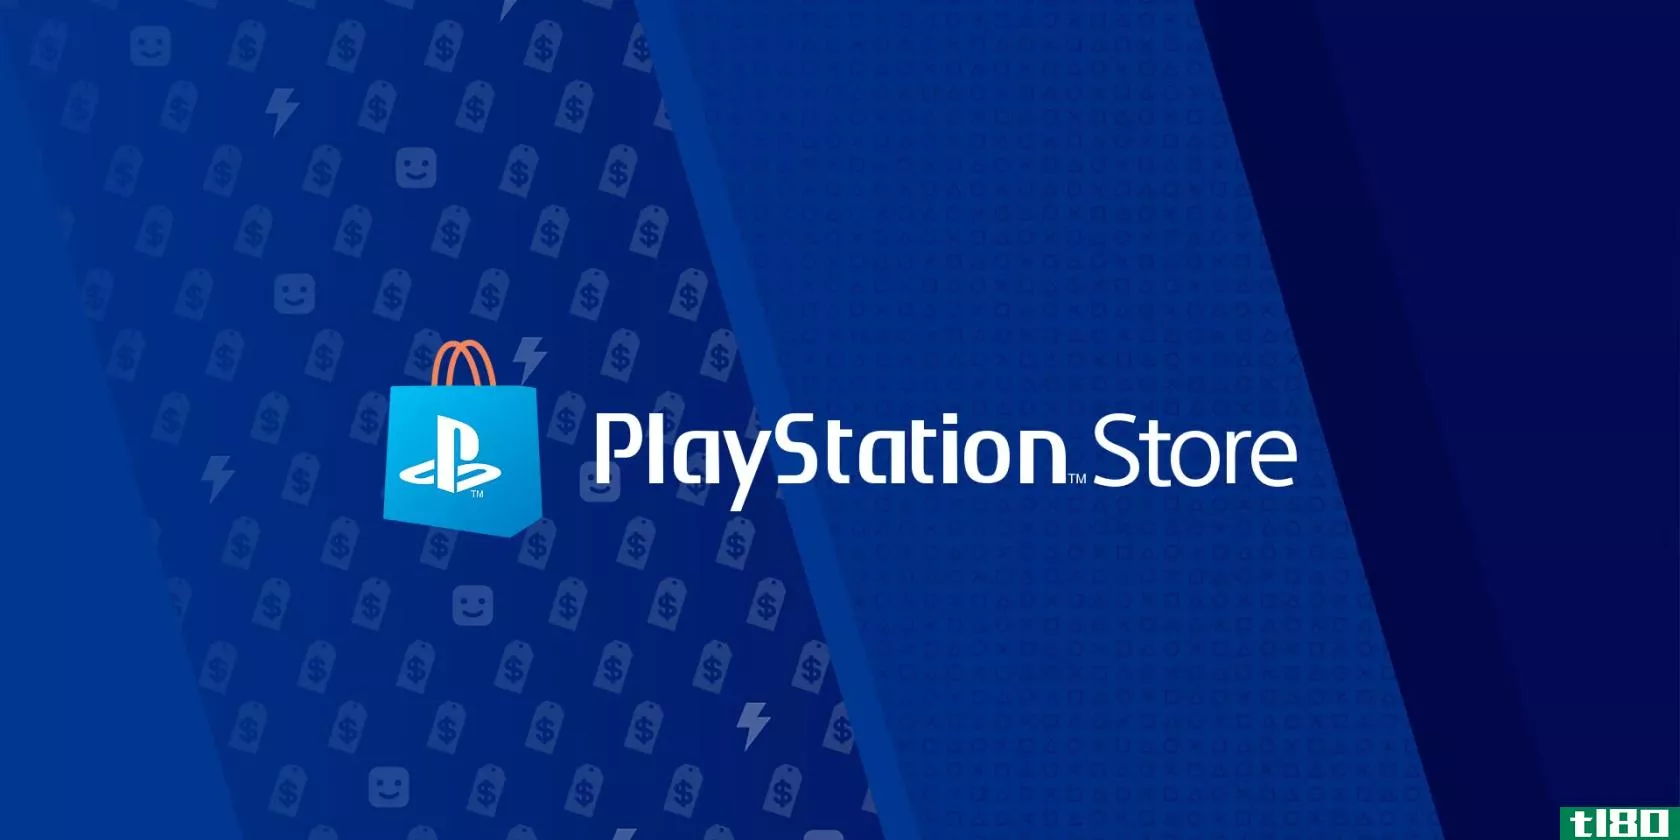 PlayStation Store Payment Featured